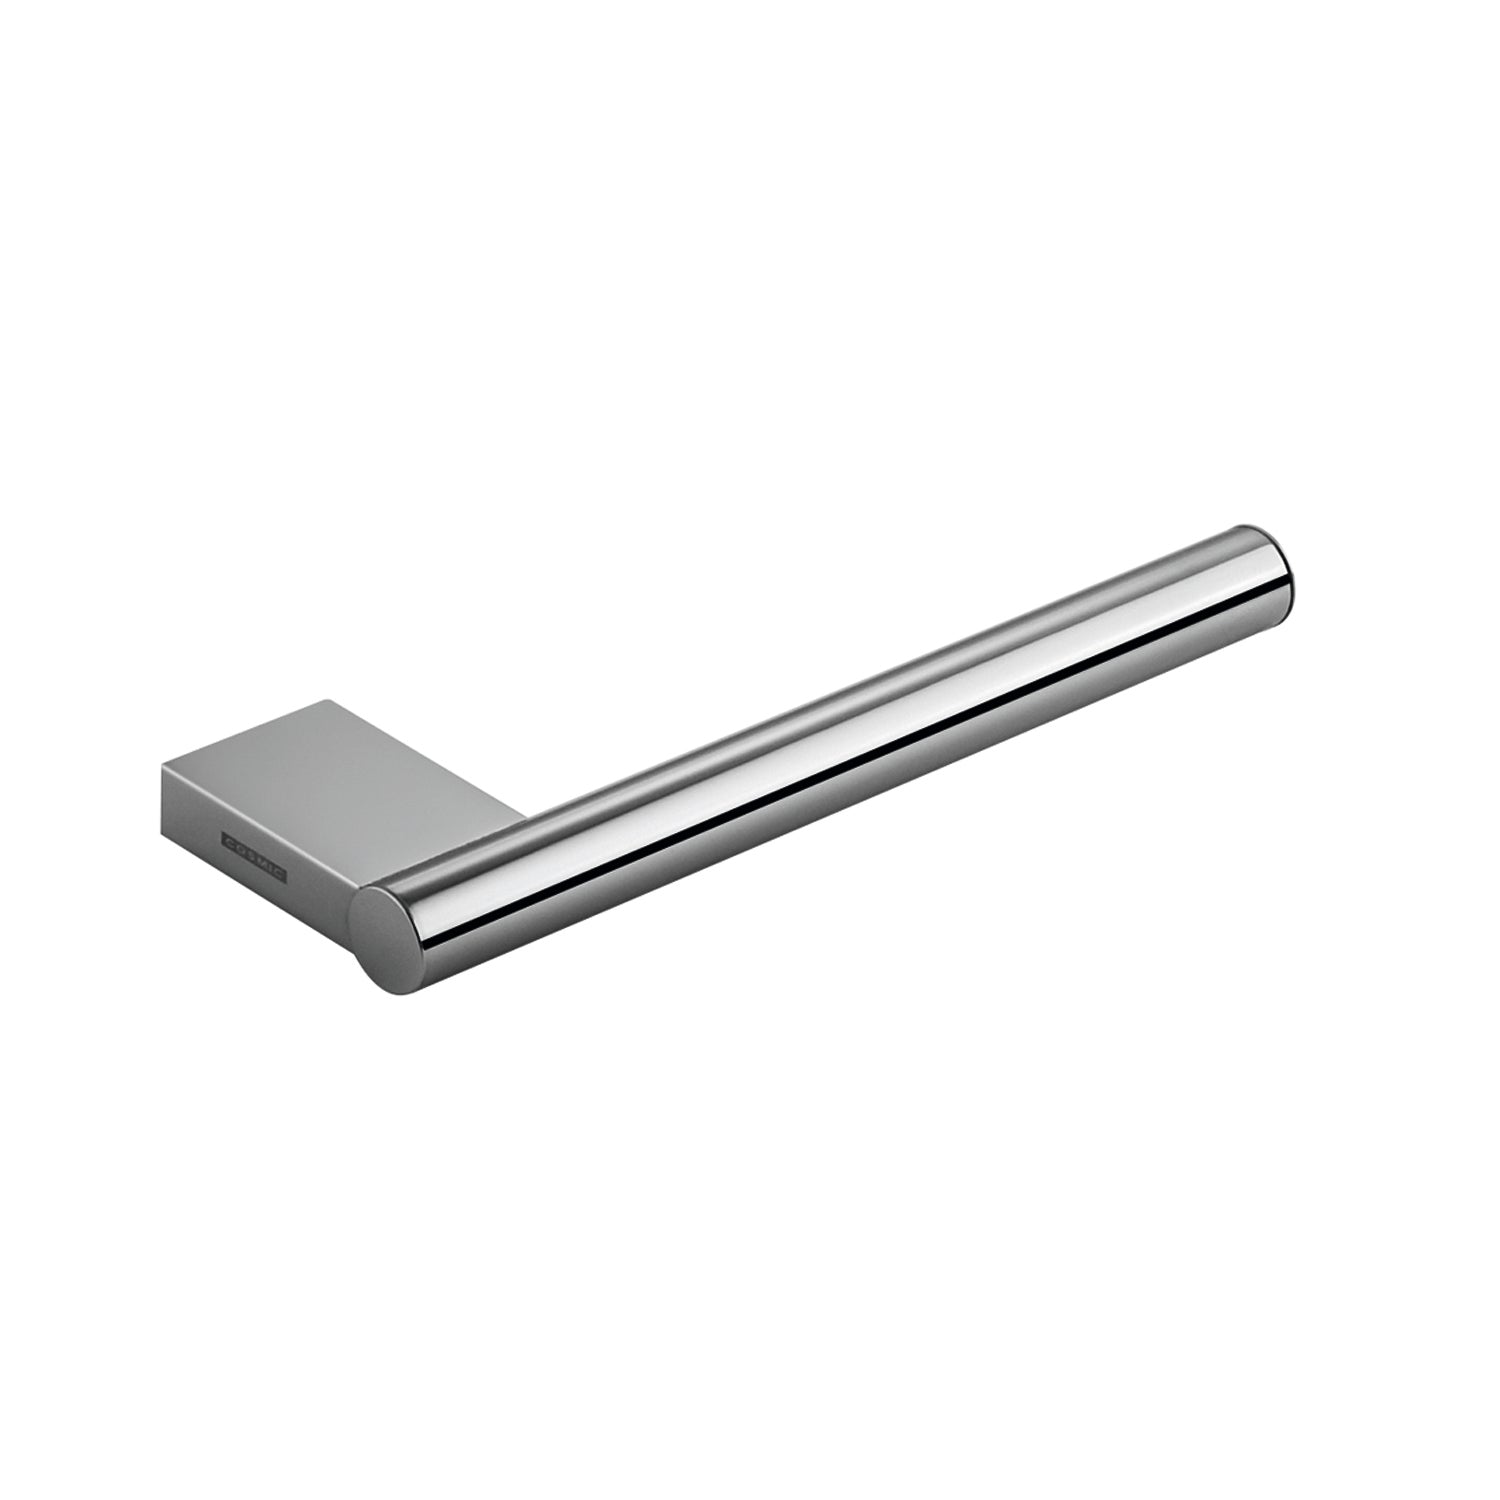 COSMIC Project Single Towel Bar, Wall Mount, Brass Body, Chrome Finish, 9-1/4 x 7/8 x 3-1/8 Inches (2510162)